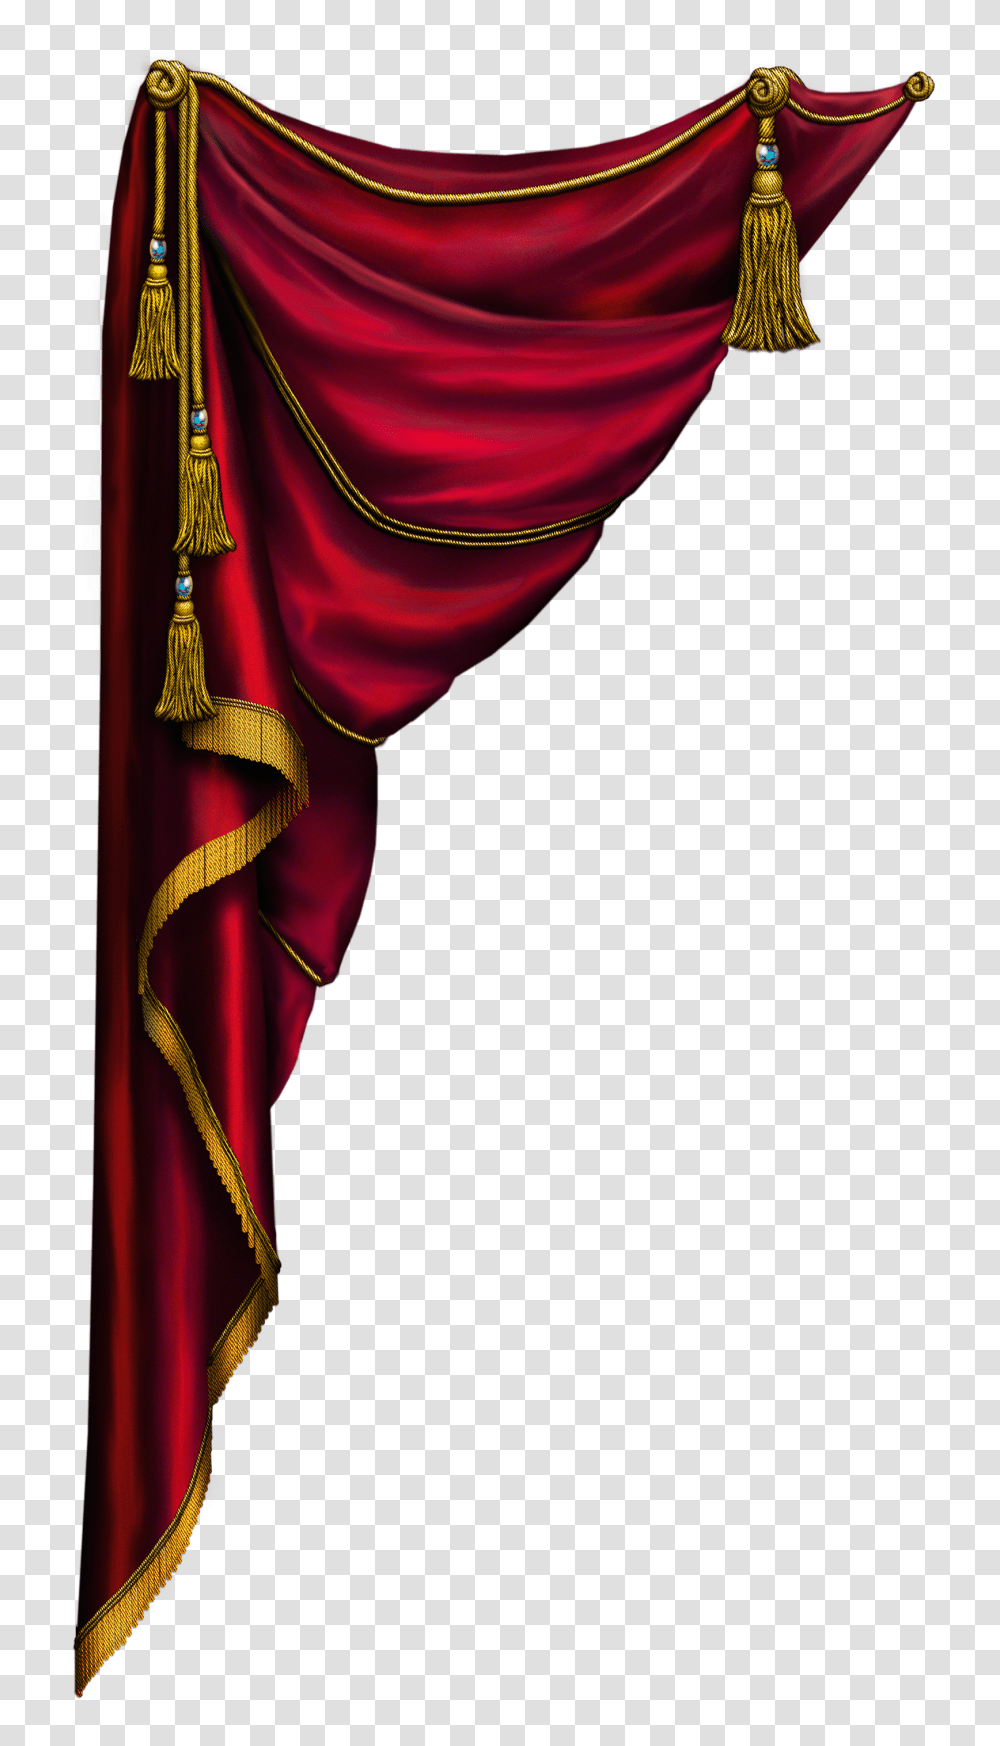 Red Curtain Left Miscellaneous Images Curtains, Dance Pose, Leisure Activities, Silk Transparent Png